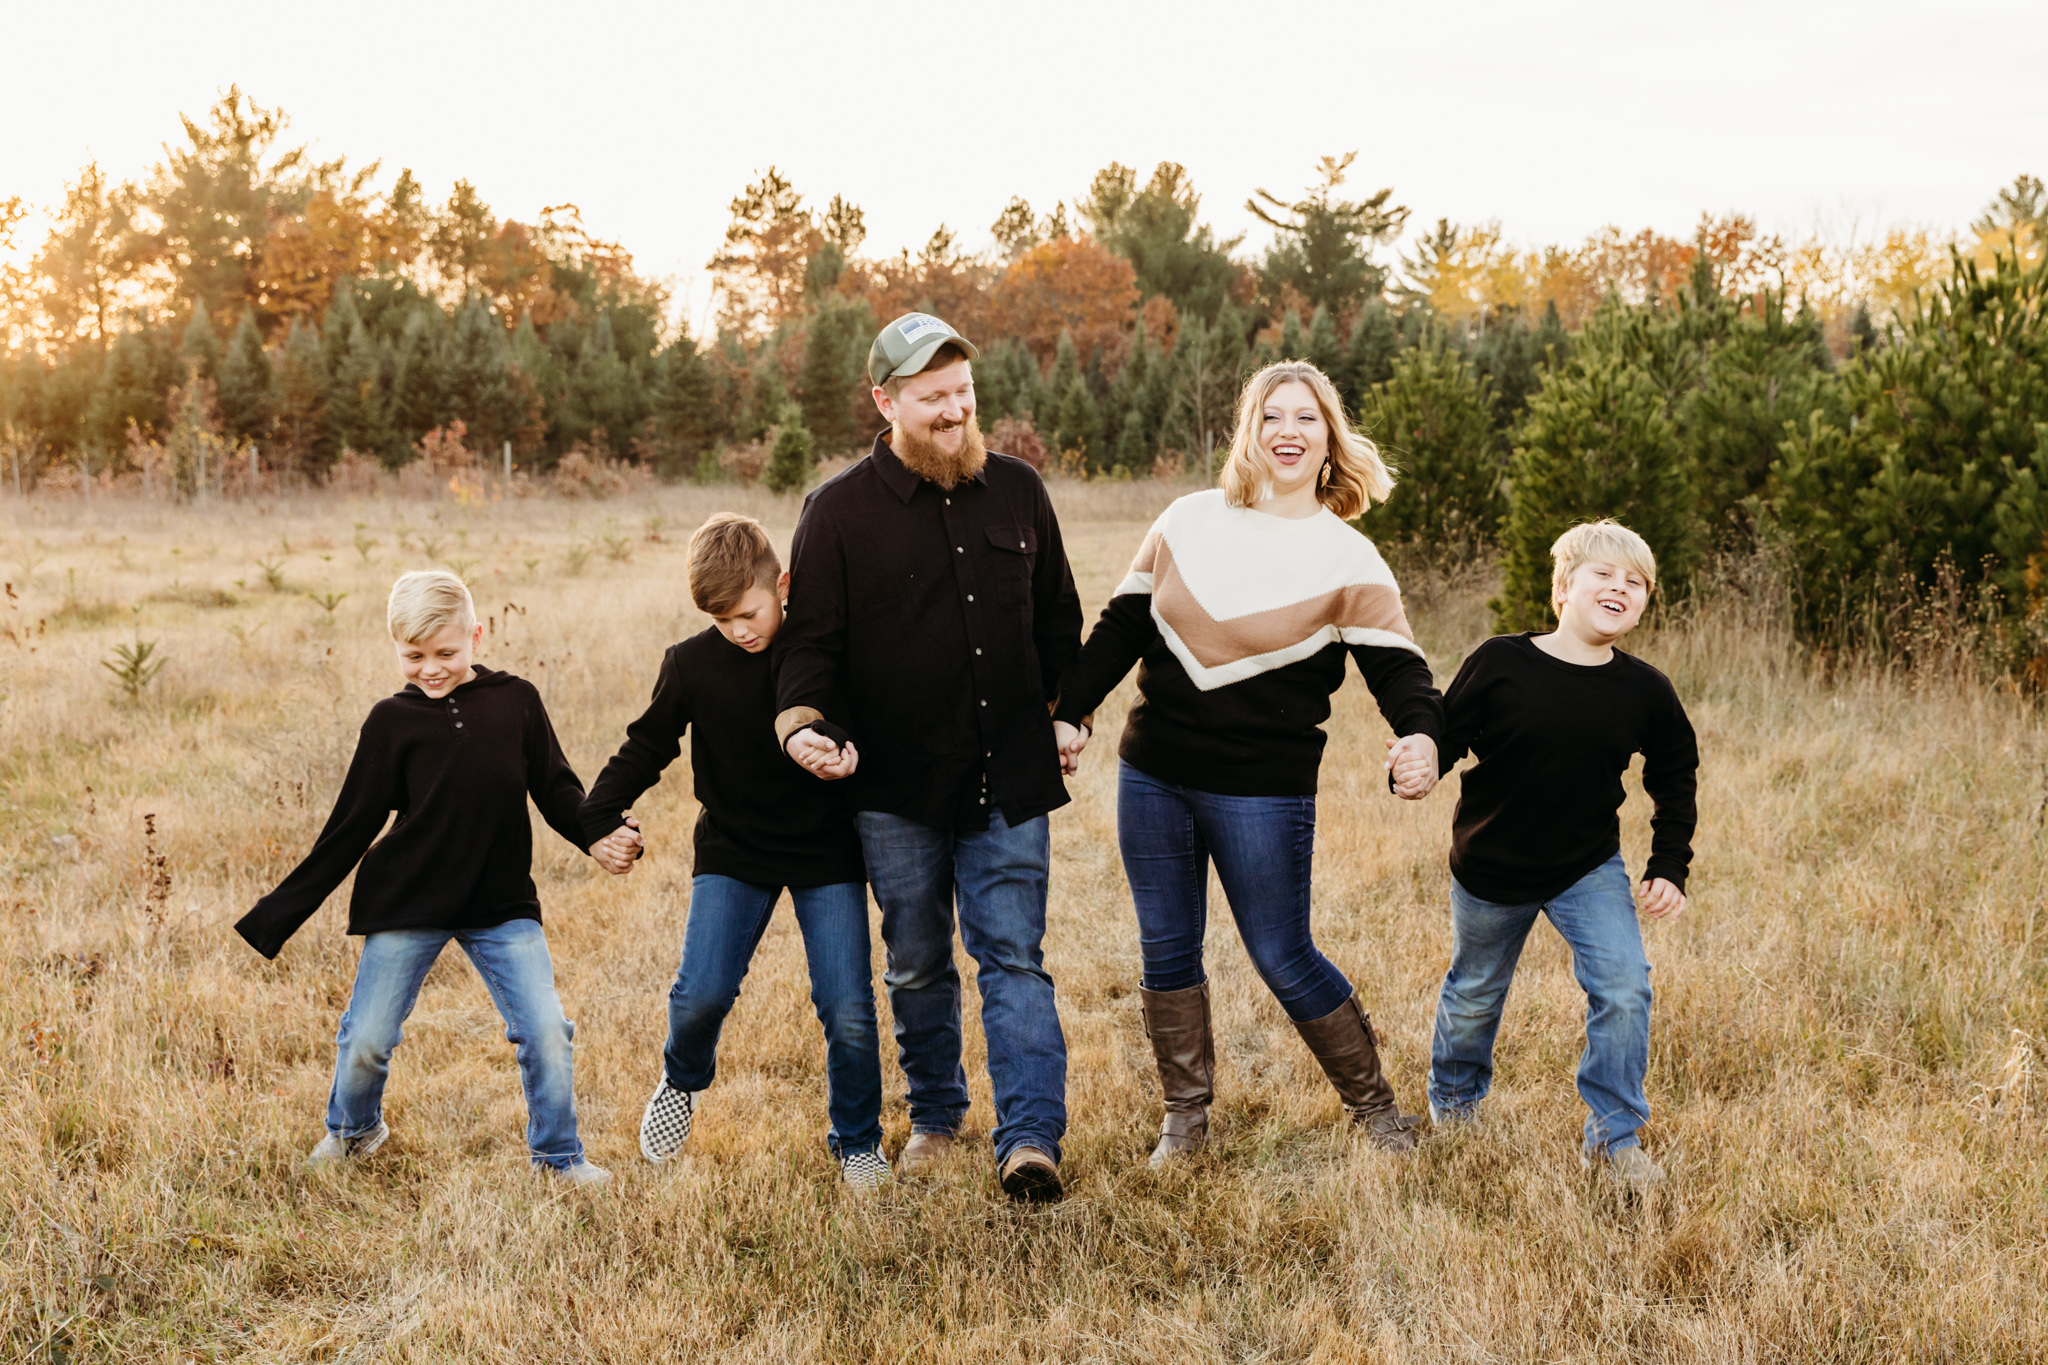 family of 5 playing in a field while wearing black